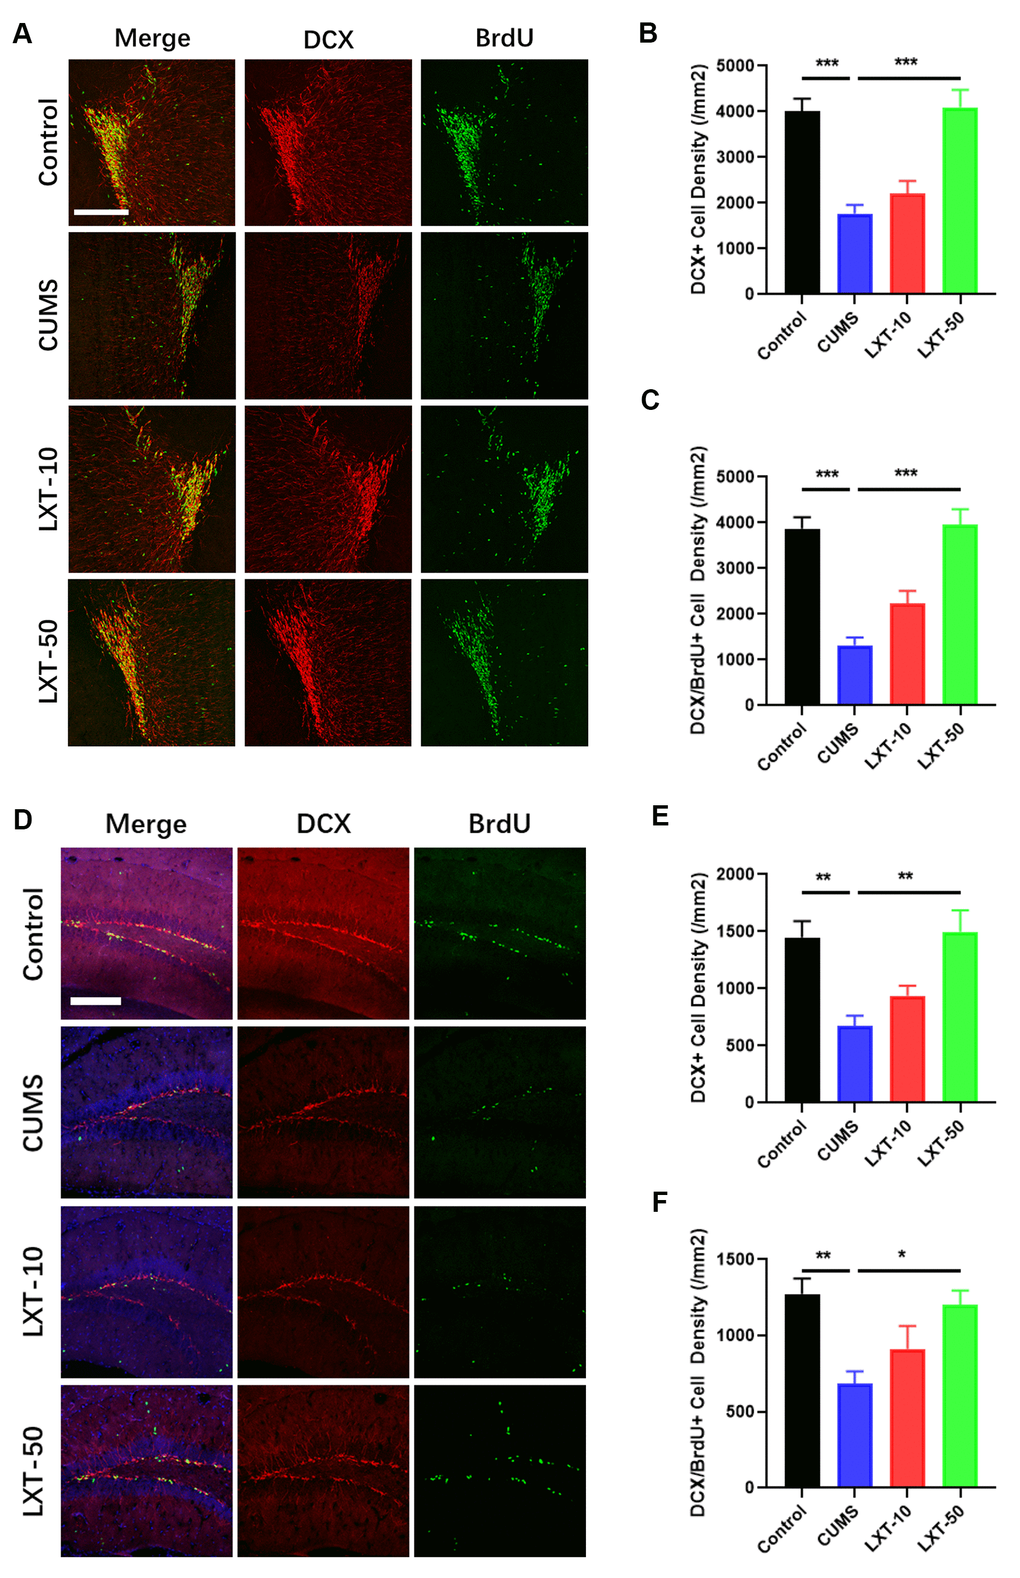 LXT intranasal treatment enhanced adult neurogenesis in hippocampus and olfactory bulbs. (A, D) Confocal image to show the distribution and cell number of DCX+ immature neurons (Red) and BrdU+ (Green) newborn cells in olfactory bulb and hippocampal DG region. (B, C) DCX+ immature neuron cell density and the newborn DCX+/BrdU+ cell density in olfactory bulb was recovered by LXT treatment. (E, F) DCX+ immature neuron cell density and the newborn DCX+/BrdU+ cell density in hippocampal DG region was recovered by LXT treatment.